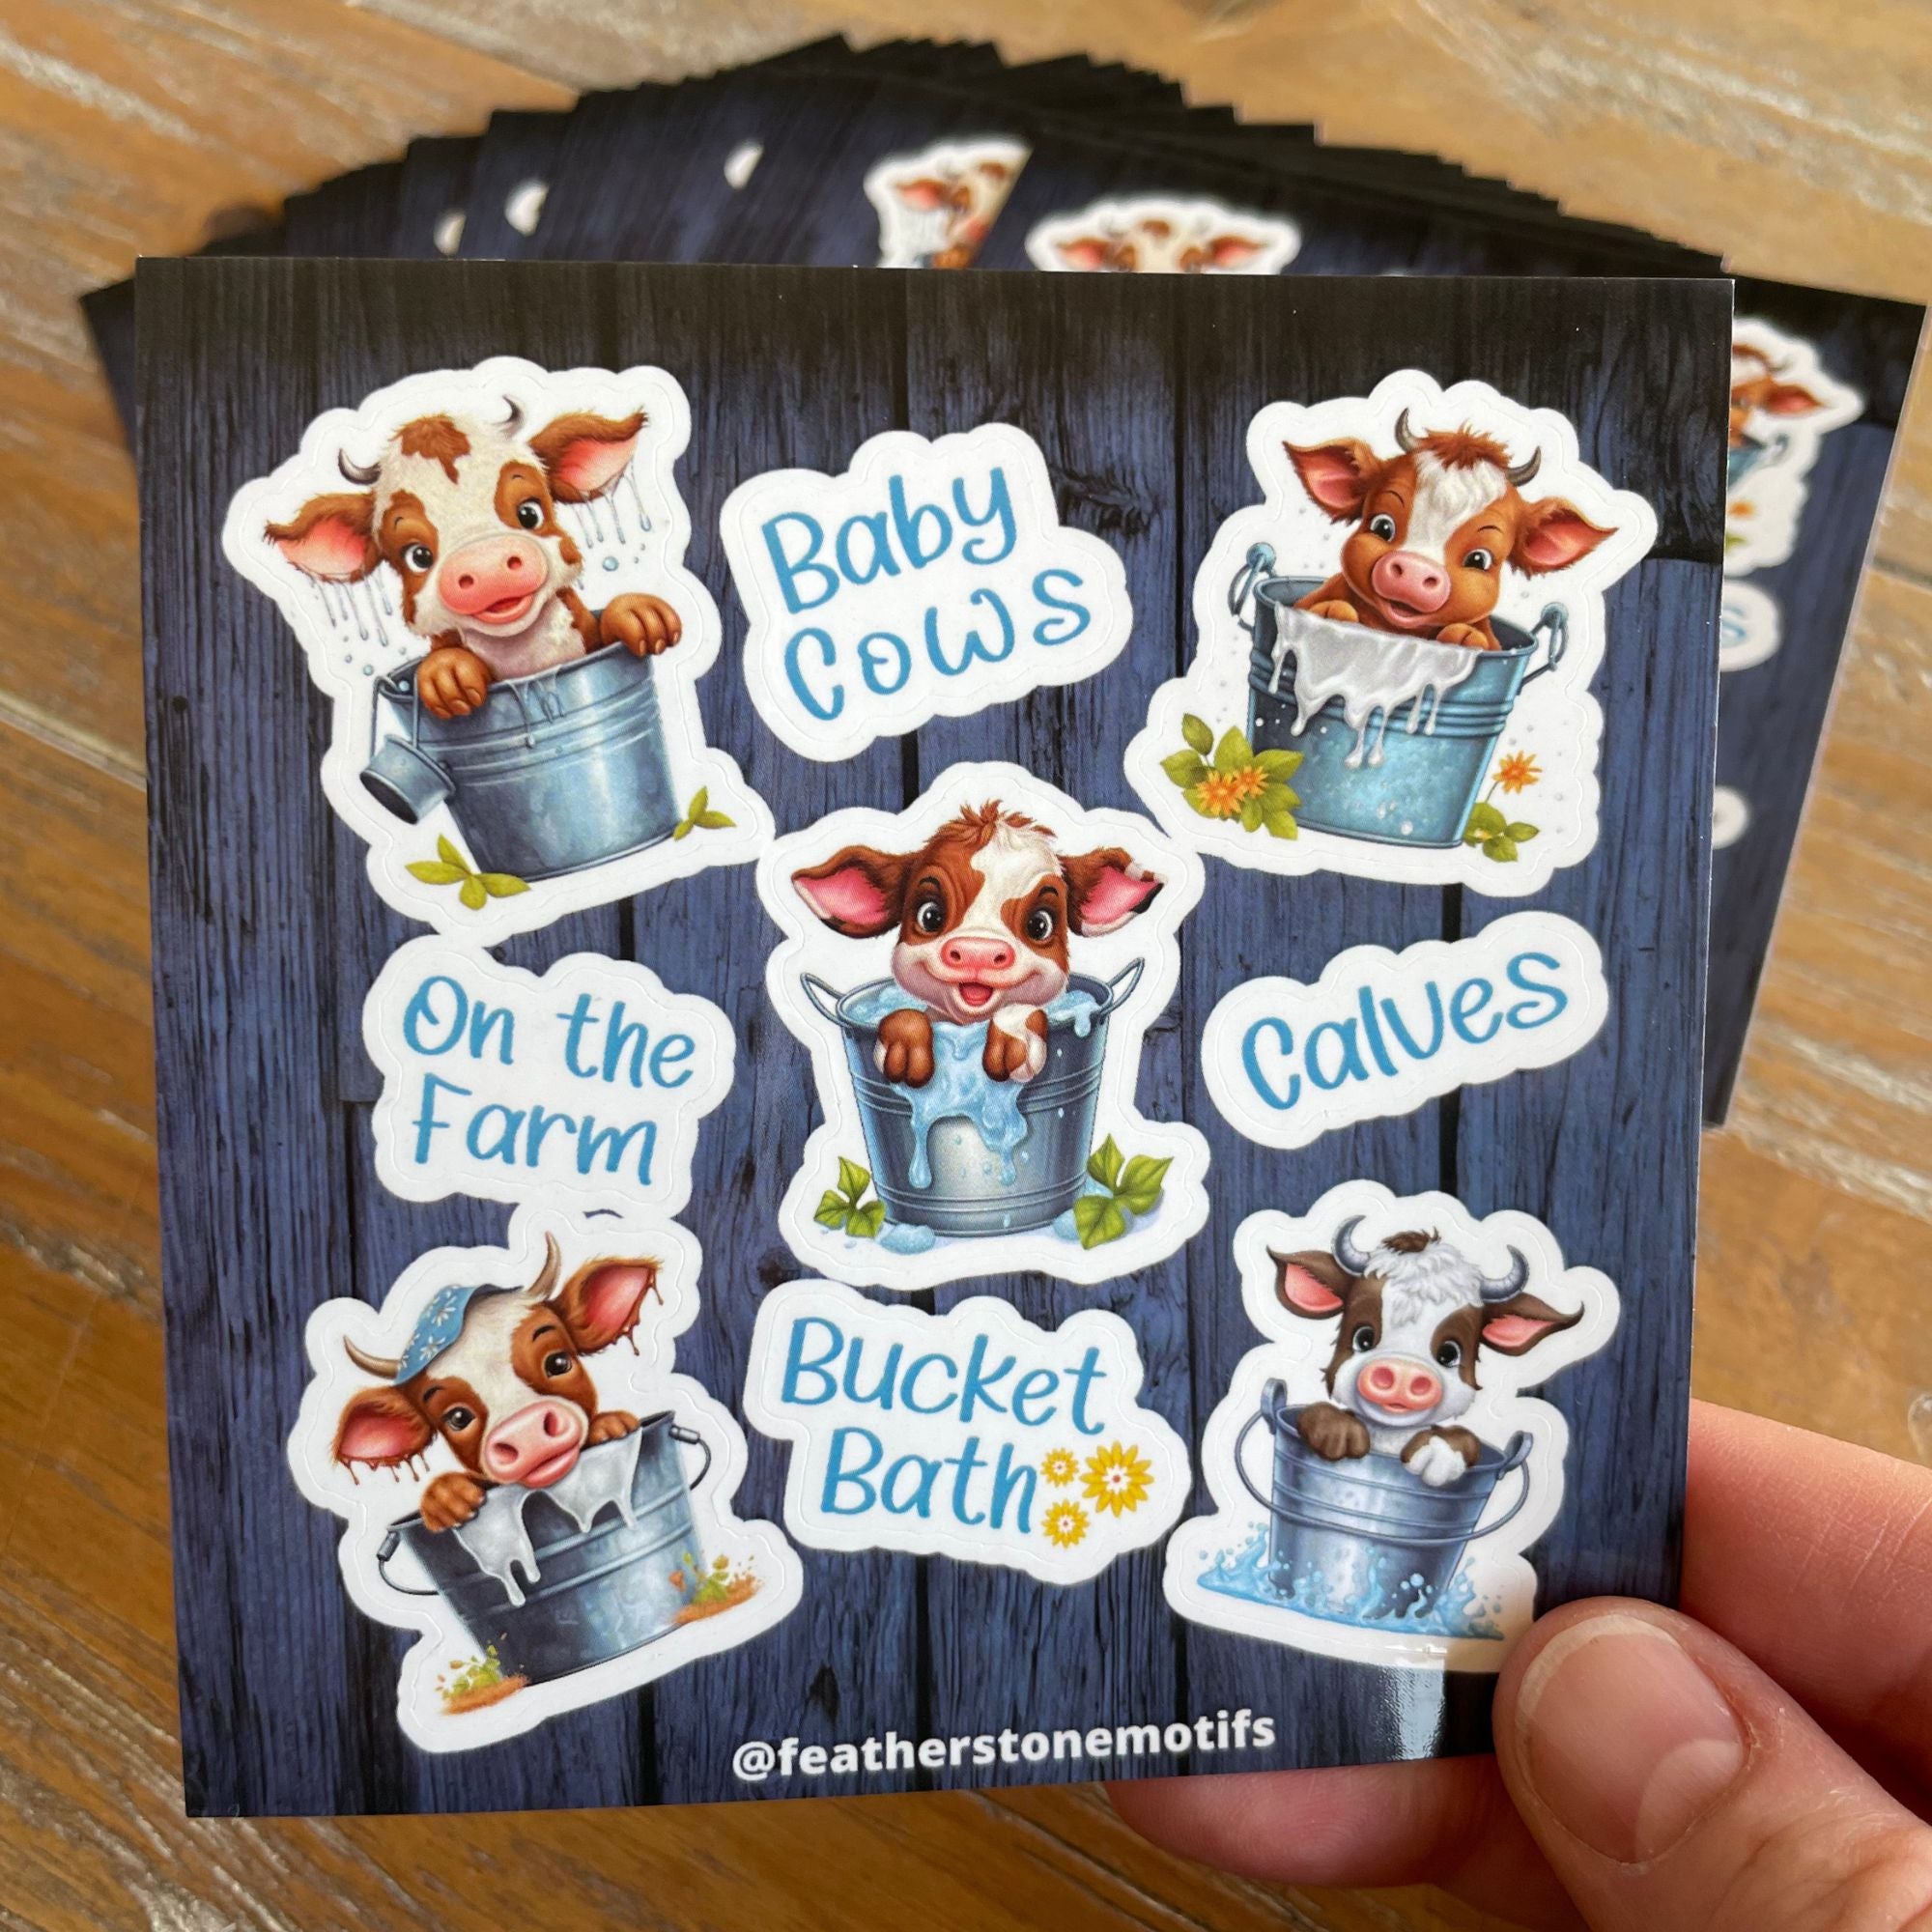 This image shows the Baby Cows mini sheet